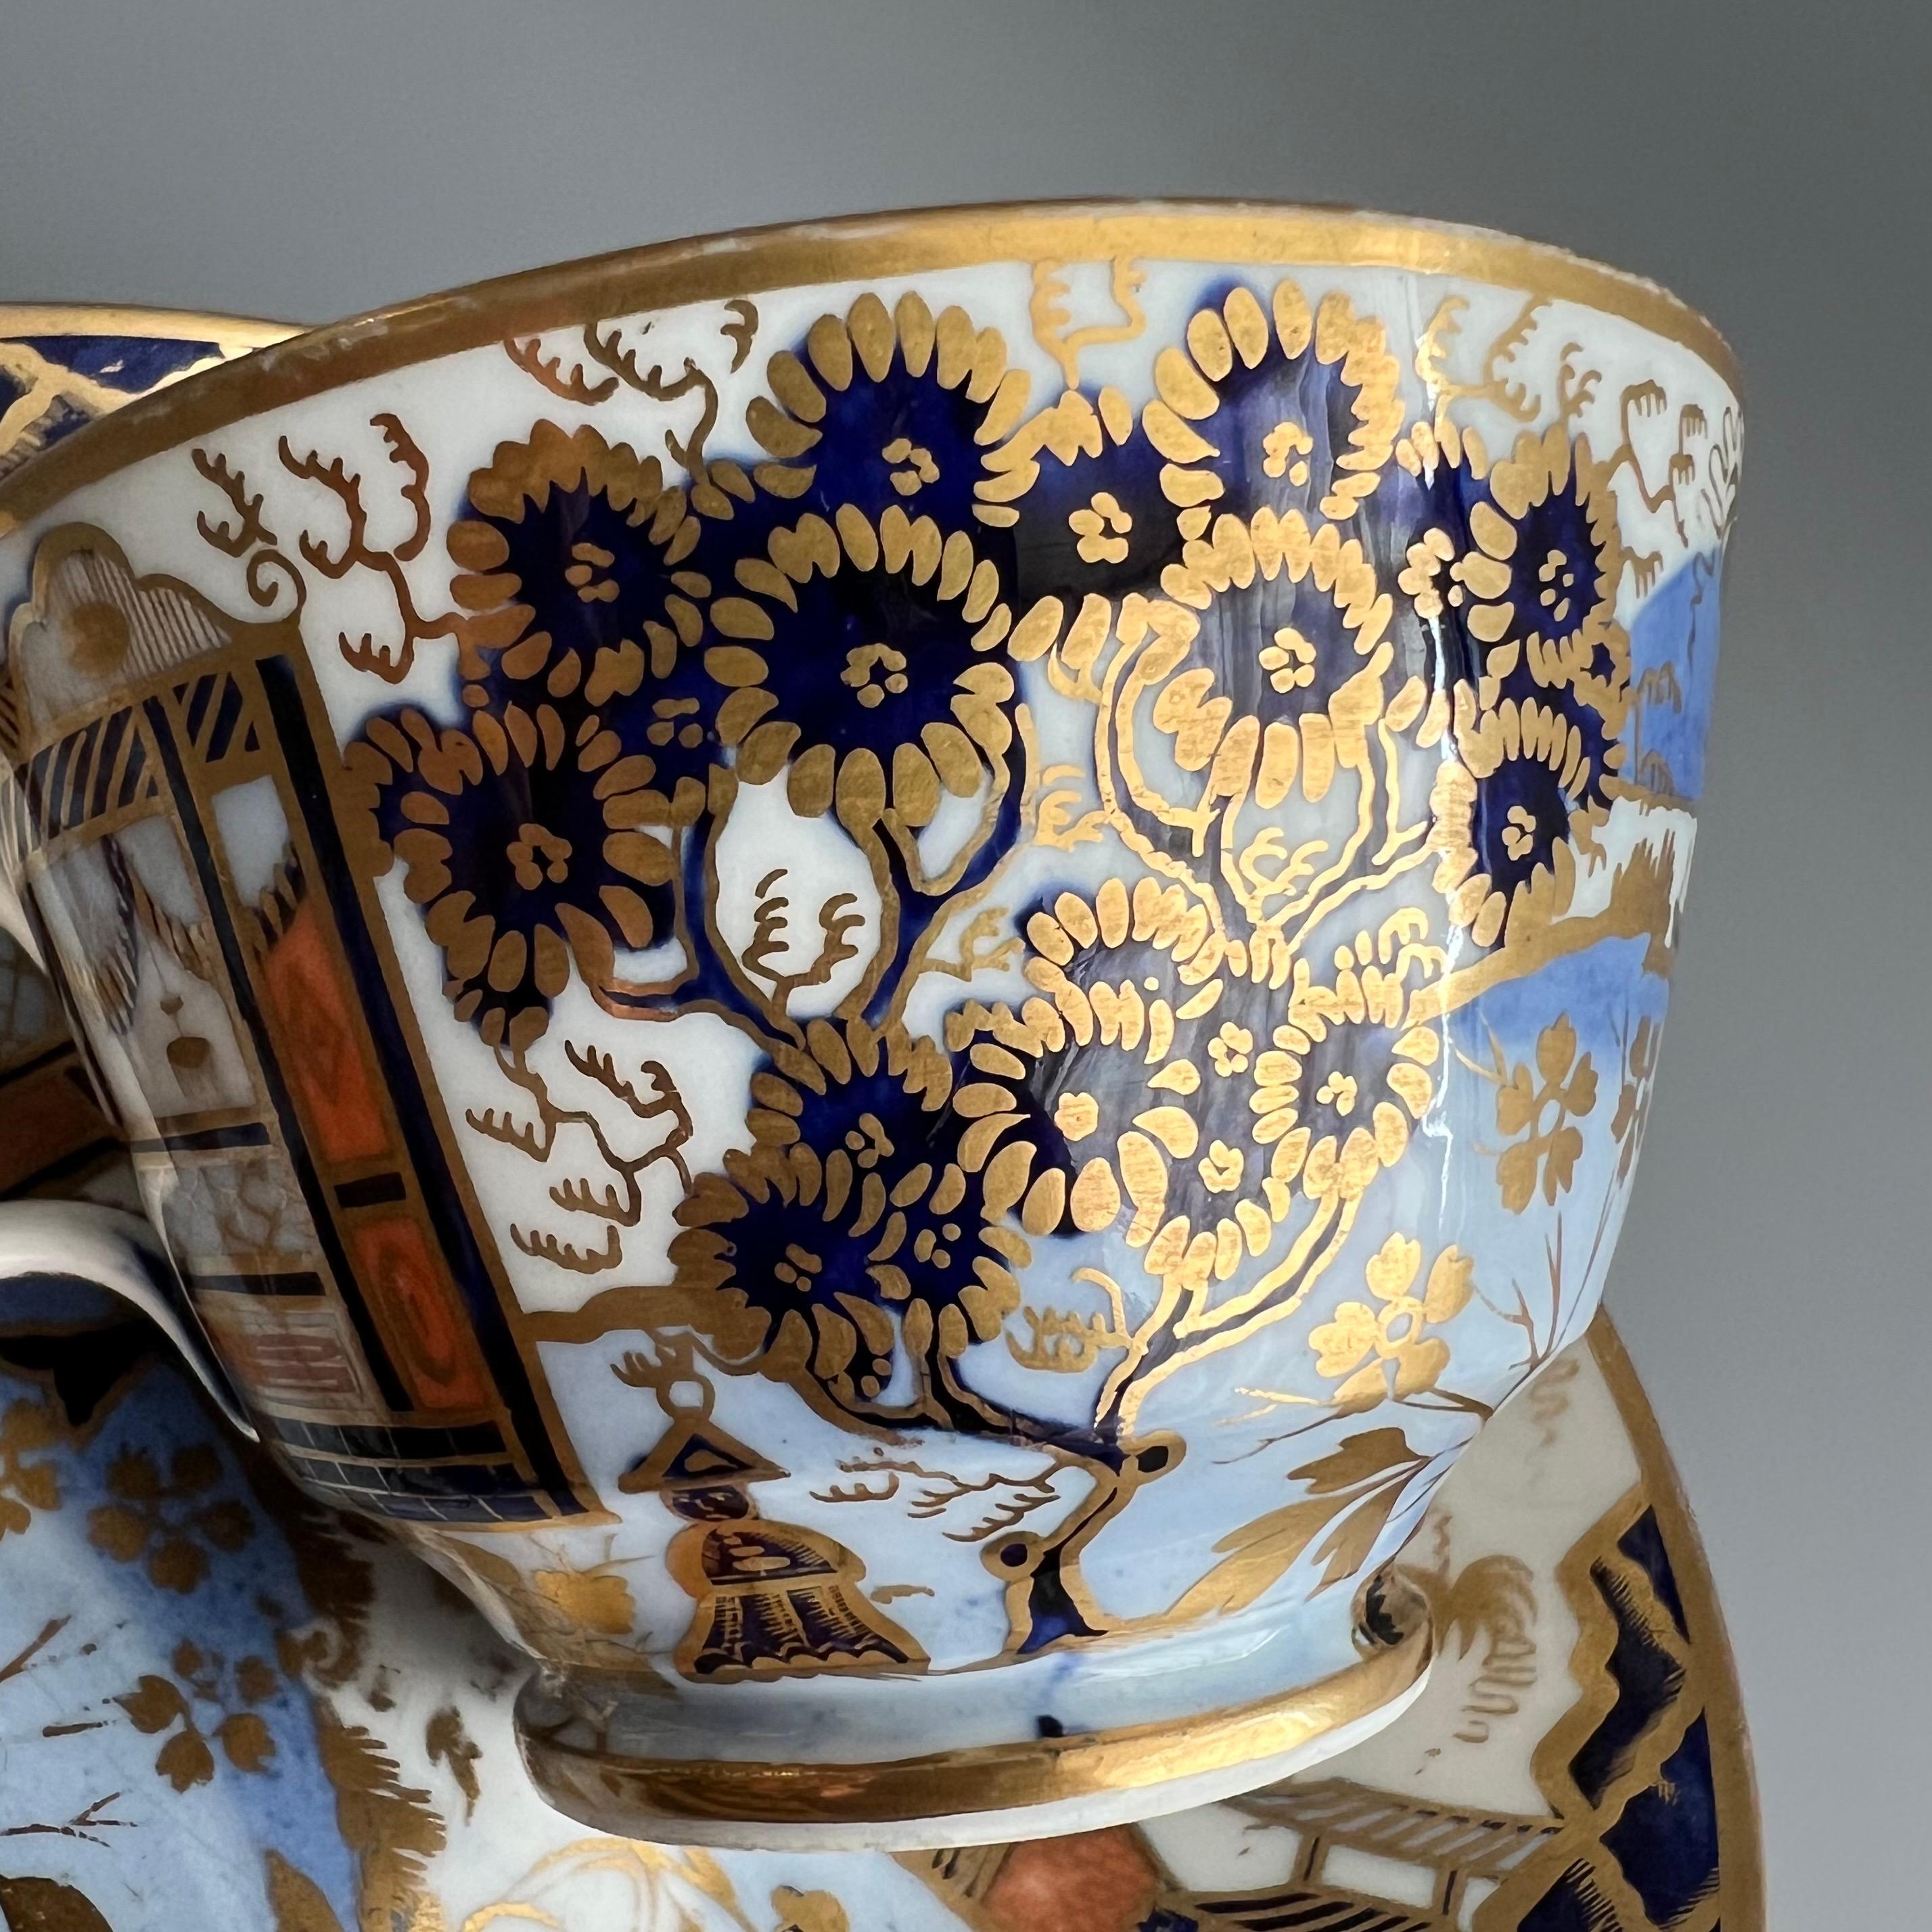 New Hall Porcelain Teacup, Chinoiserie Water Carrier Pattern 1163, Ca 1815 1